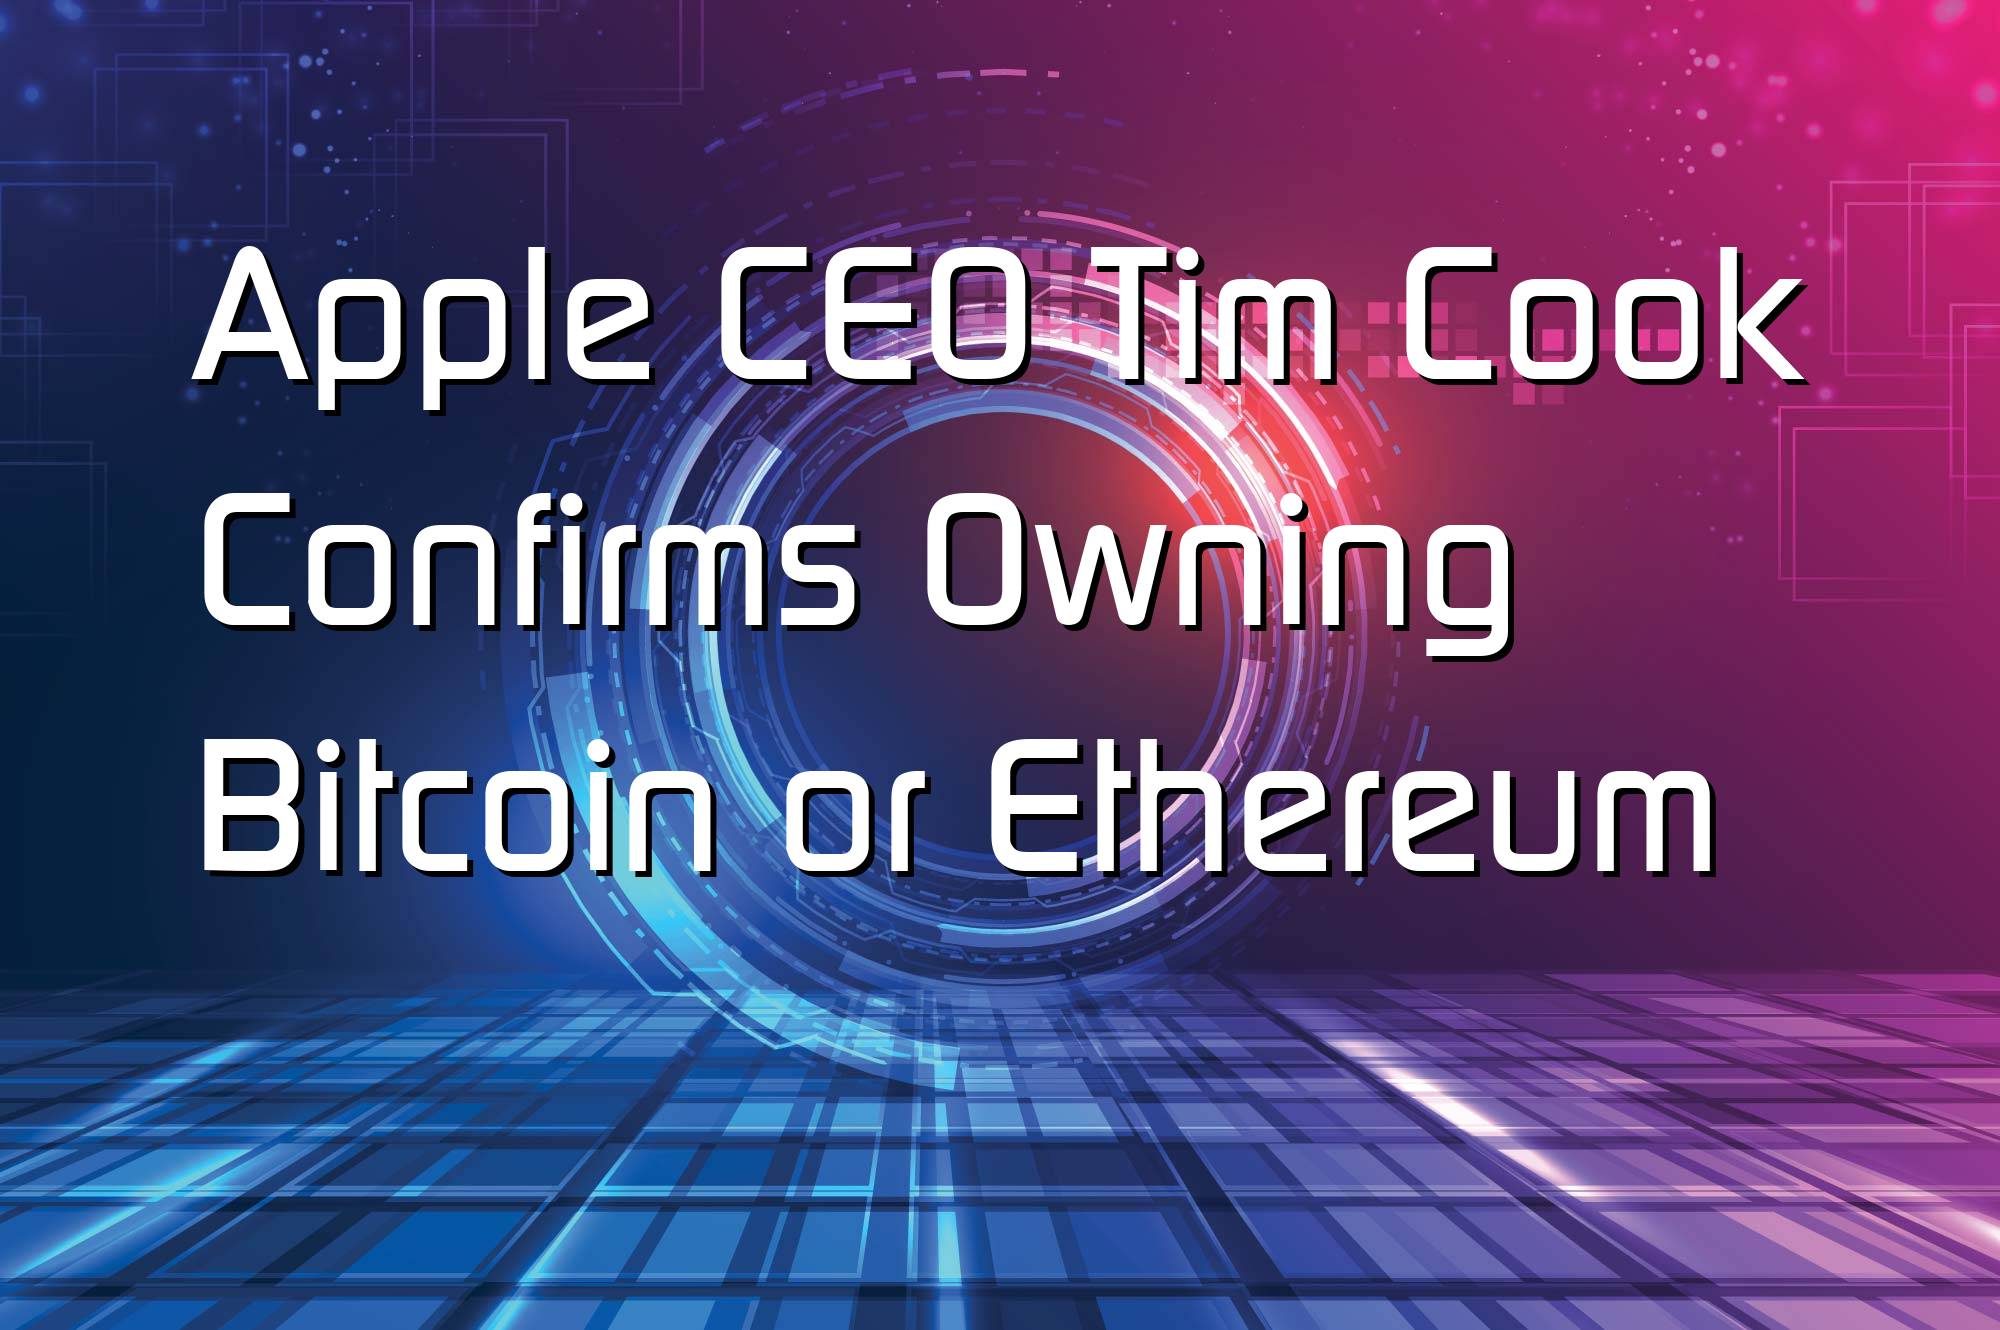 @$66506: Apple CEO Tim Cook Confirms Owning Bitcoin or Ethereum